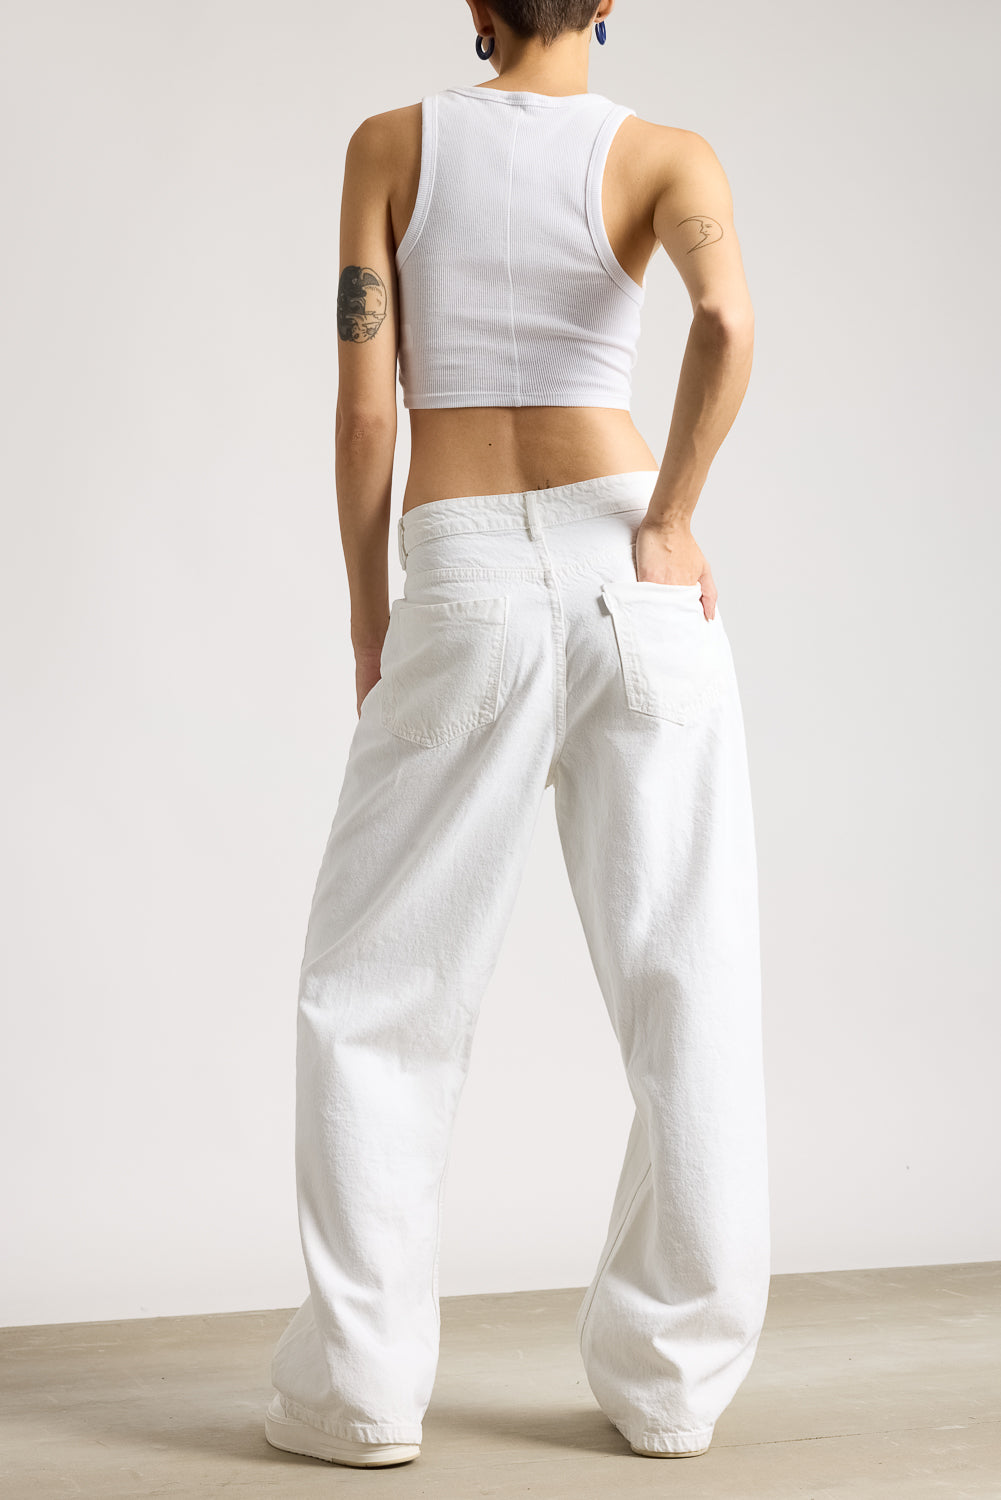 ICONIC WHITE WIDE LEG JEANS